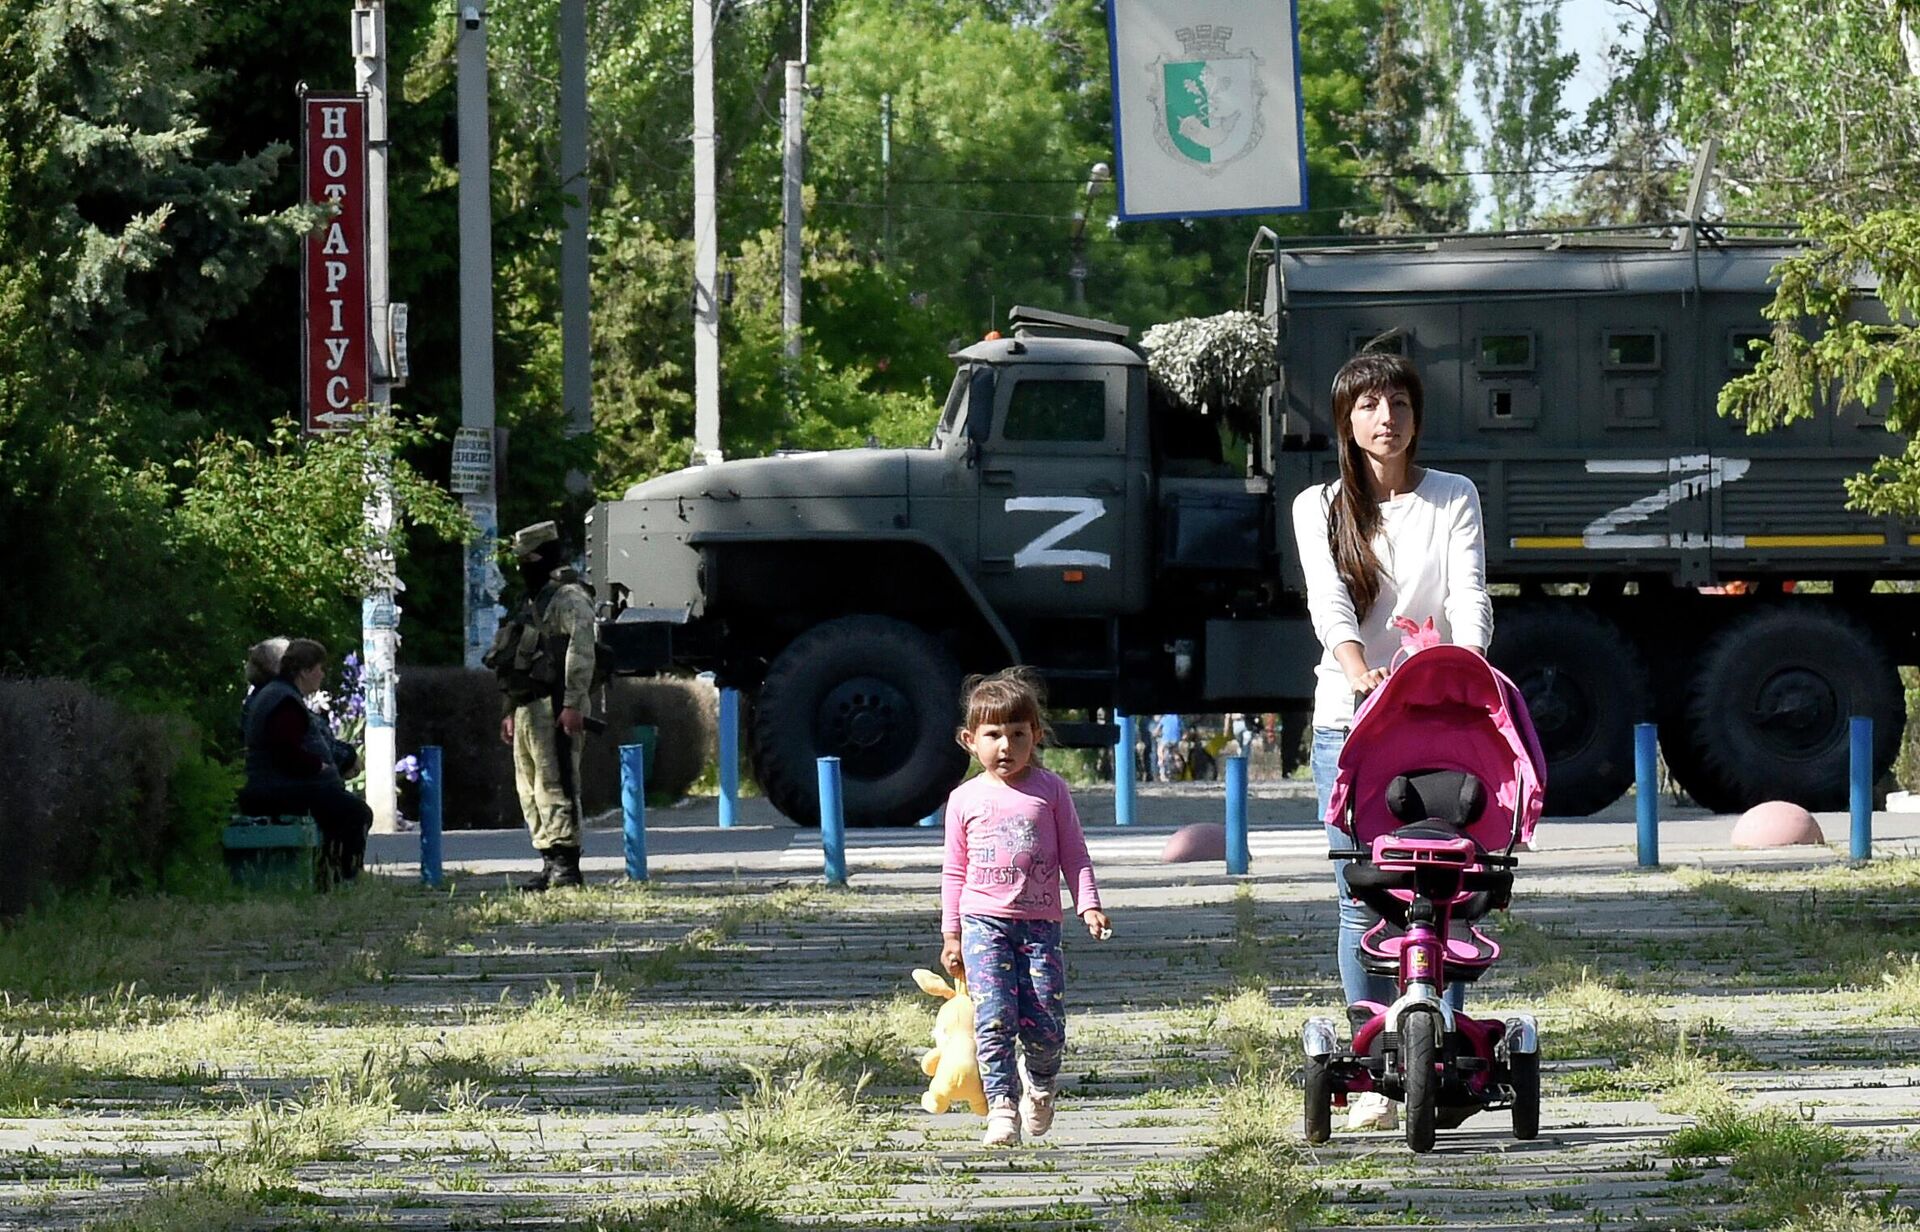 This photo taken on May 20, 2022 shows a womand and child walking in a park as Russian servicemen patrol  the street in Skadovsk, Kherson Oblast, amid the ongoing Russian military action in Ukraine - Sputnik International, 1920, 20.09.2022